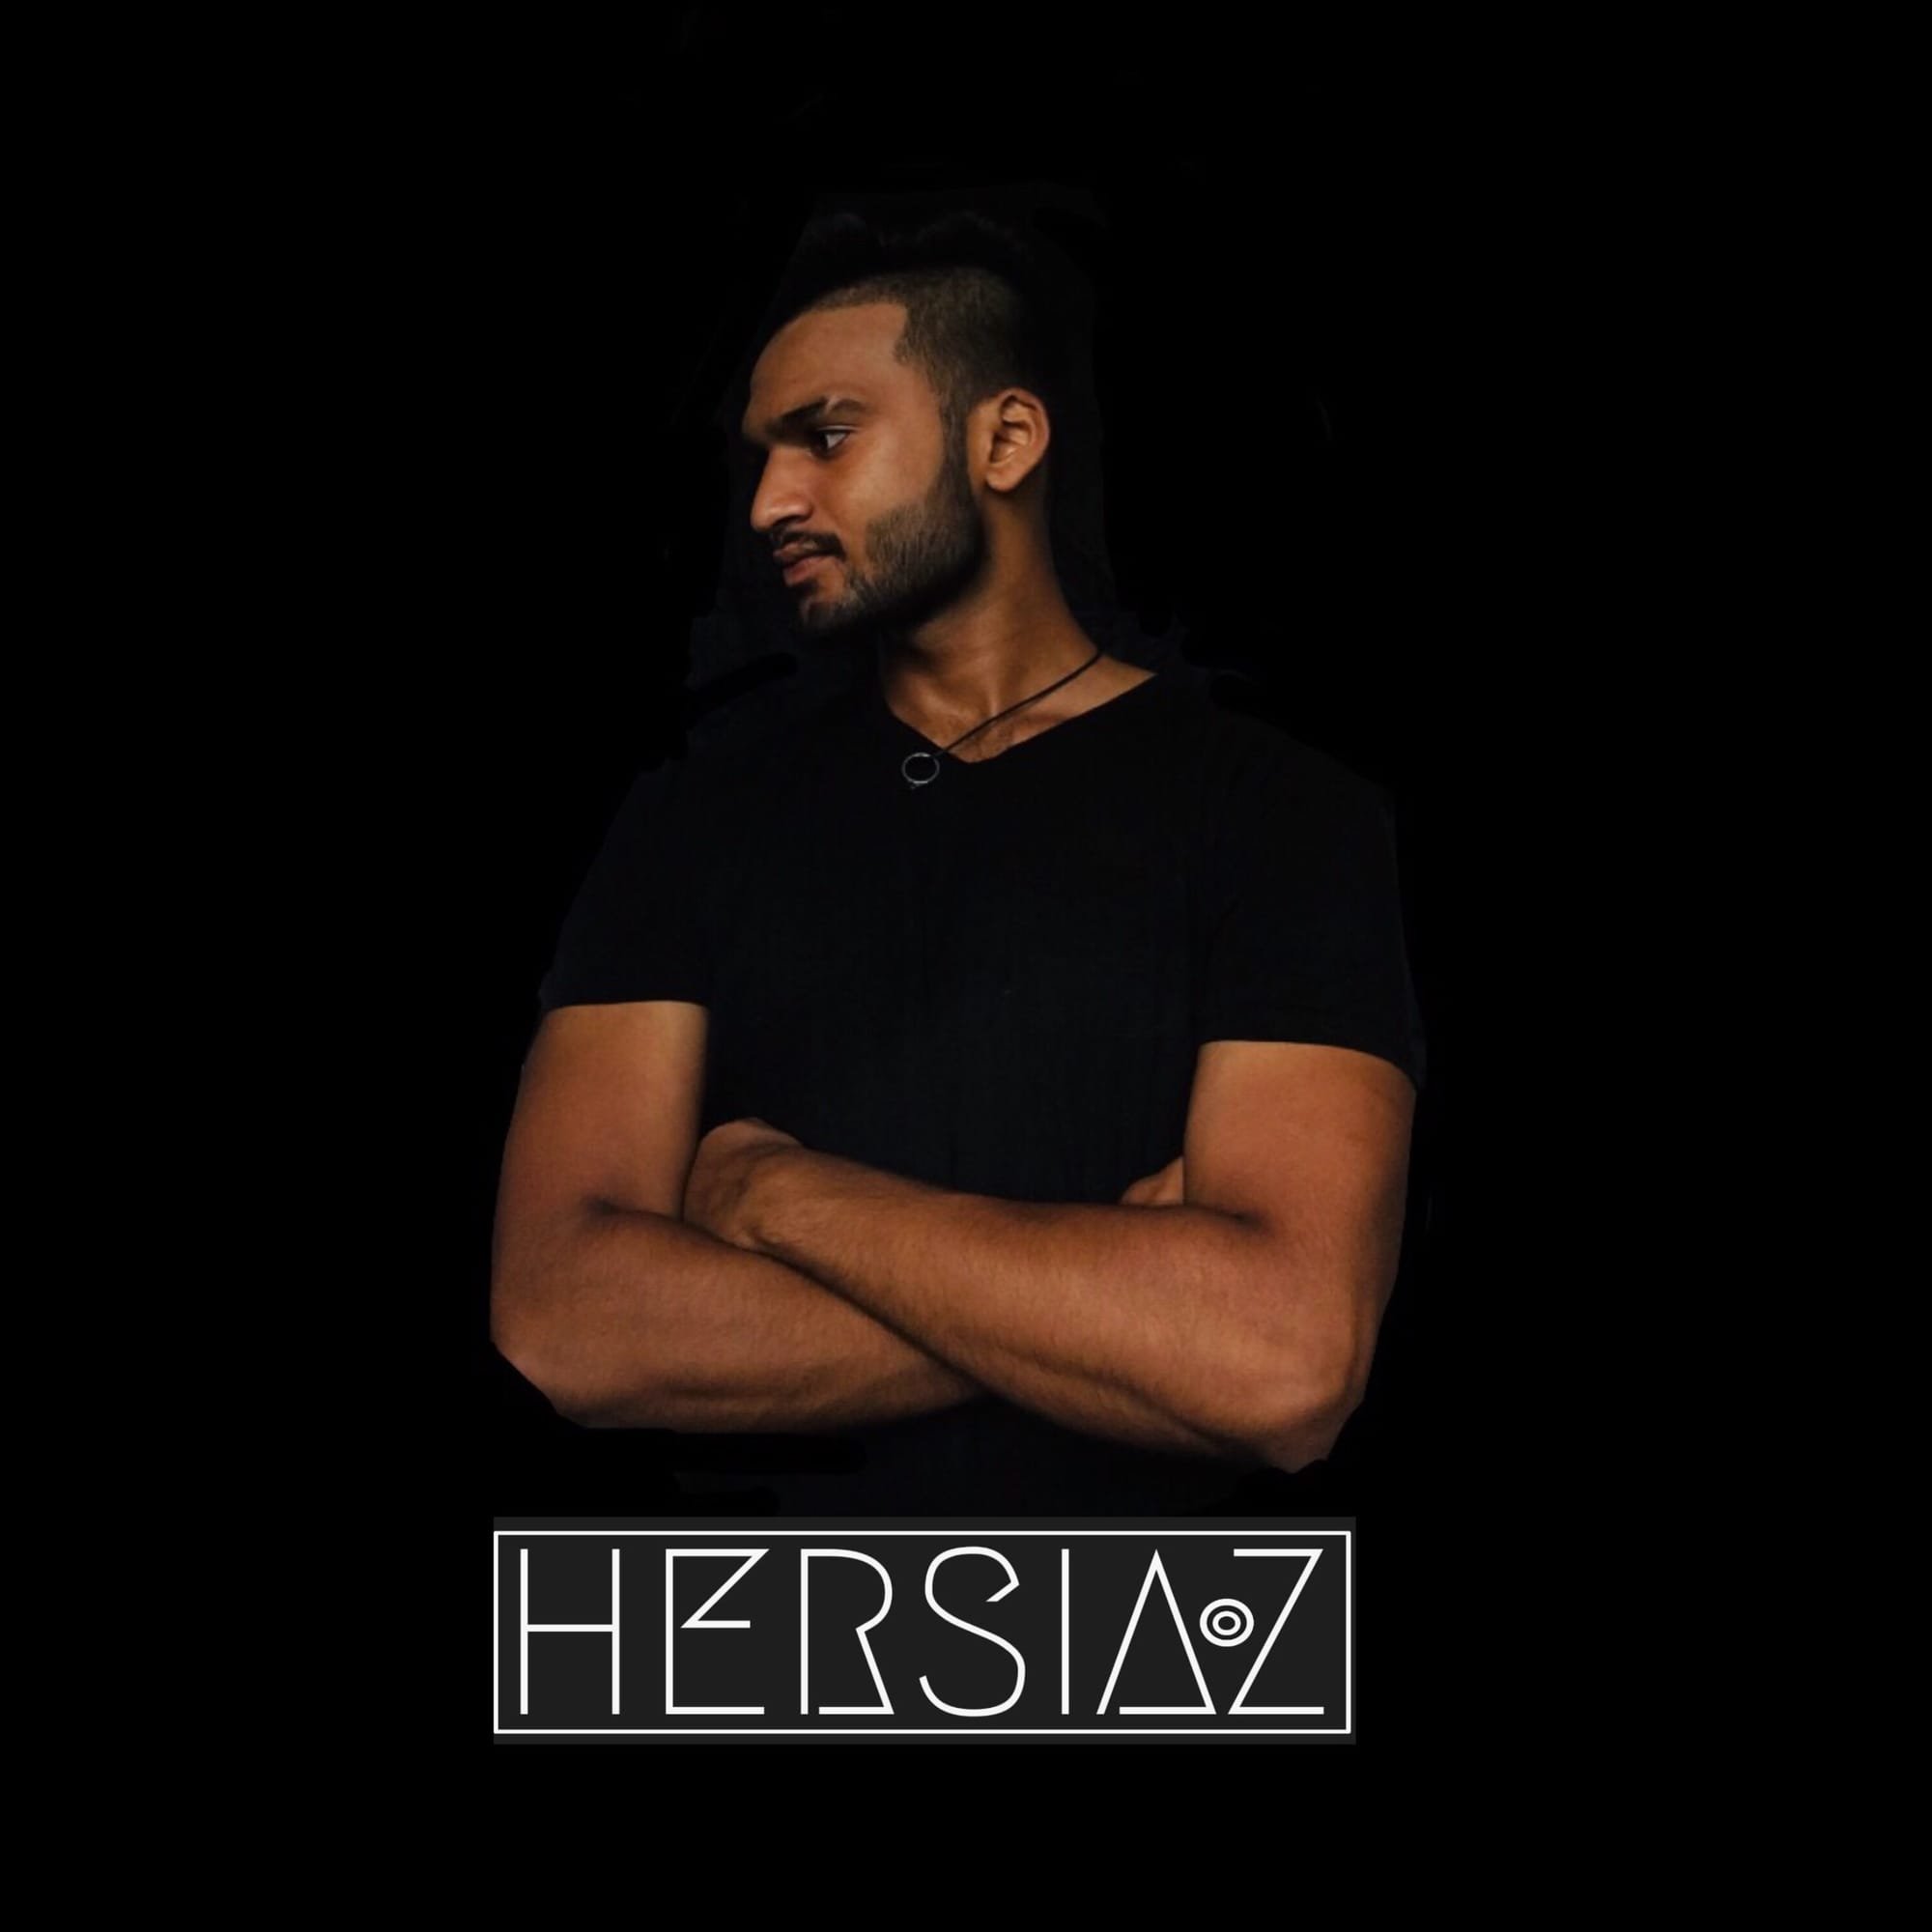 Uncharted Frequency host Hersiaz Hazi announces playlist for EP 09.